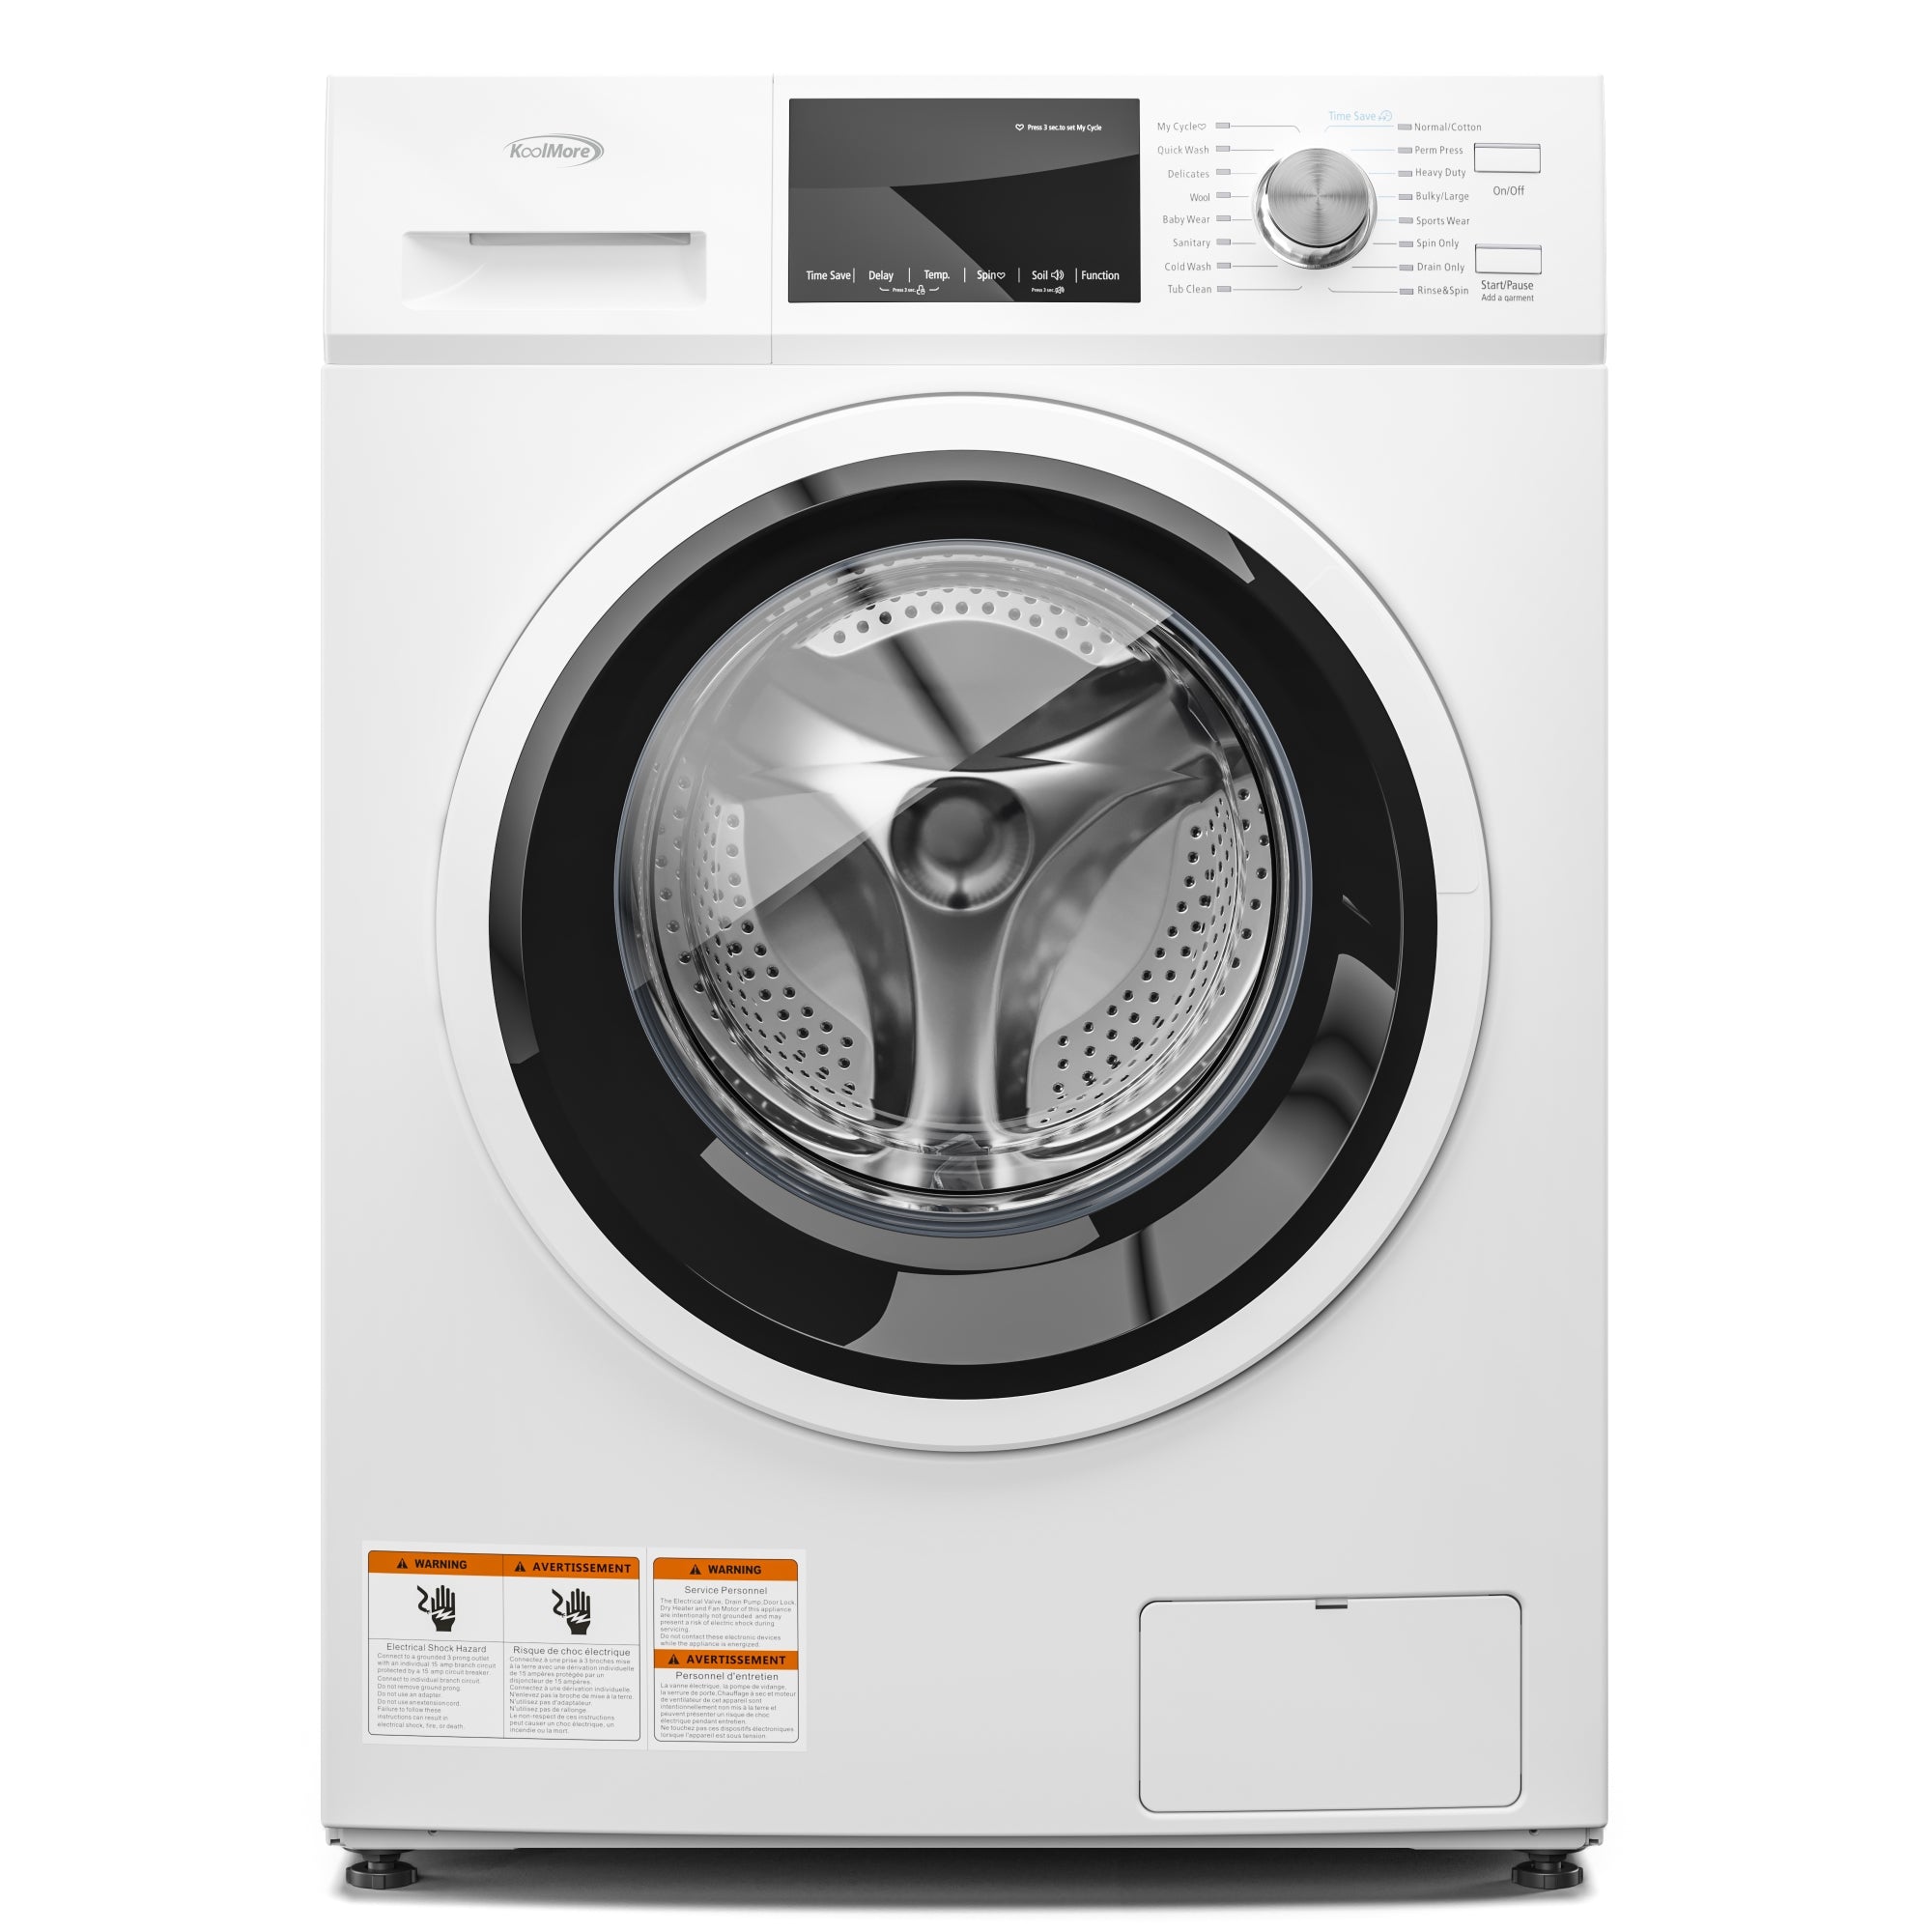 2.7 cu. Ft. Front Load Washer with 16 cycles in Compact White